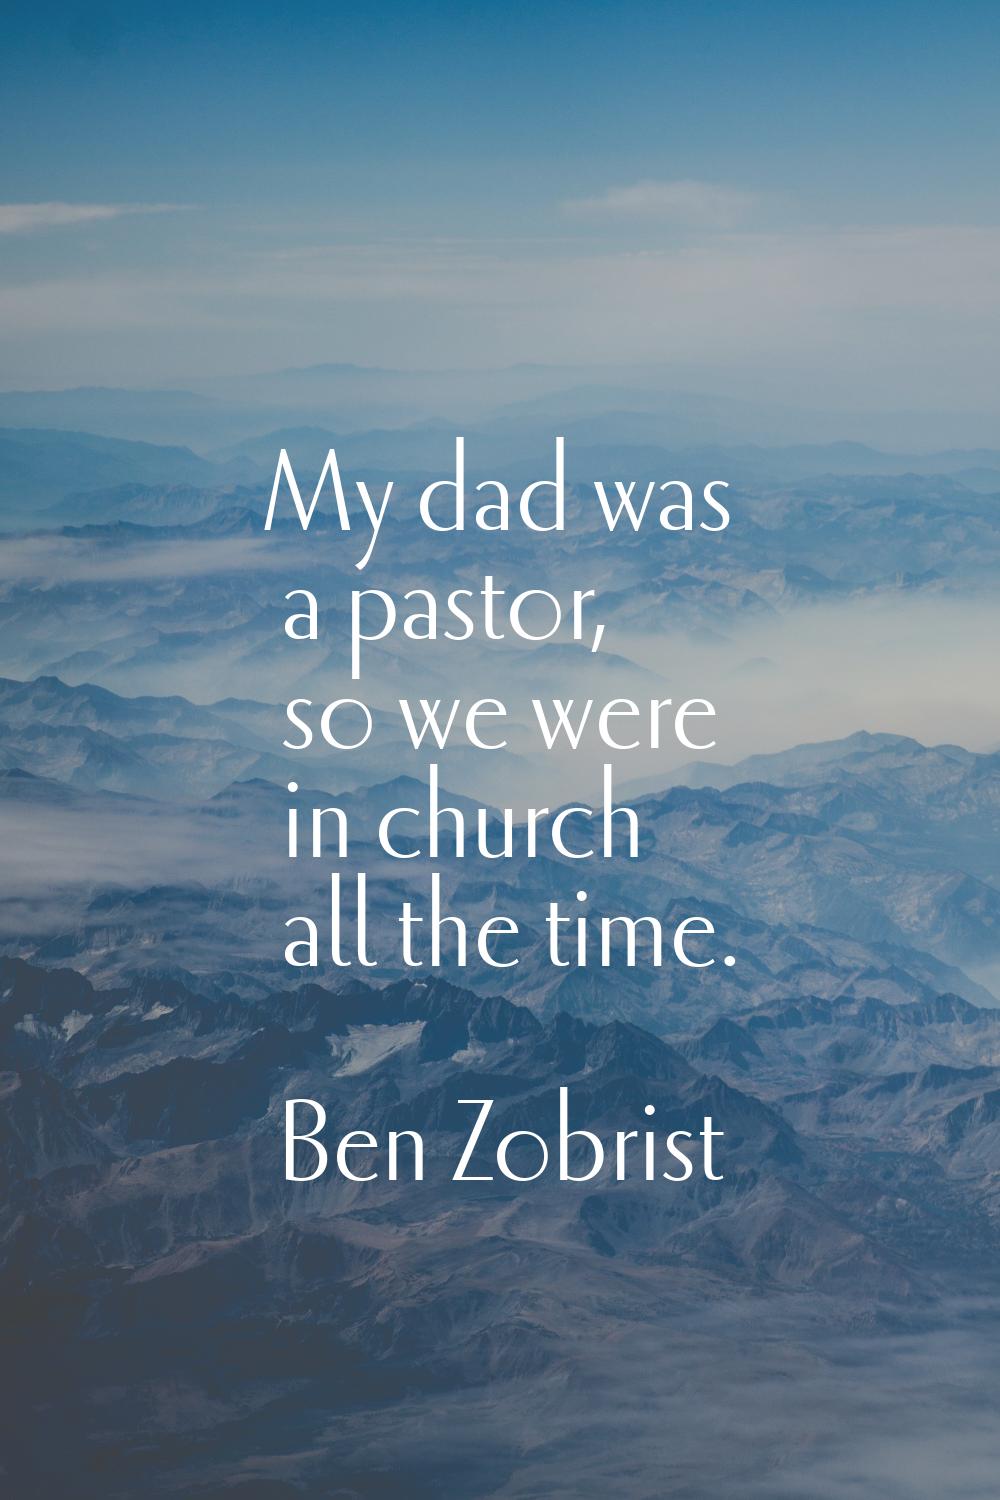 My dad was a pastor, so we were in church all the time.